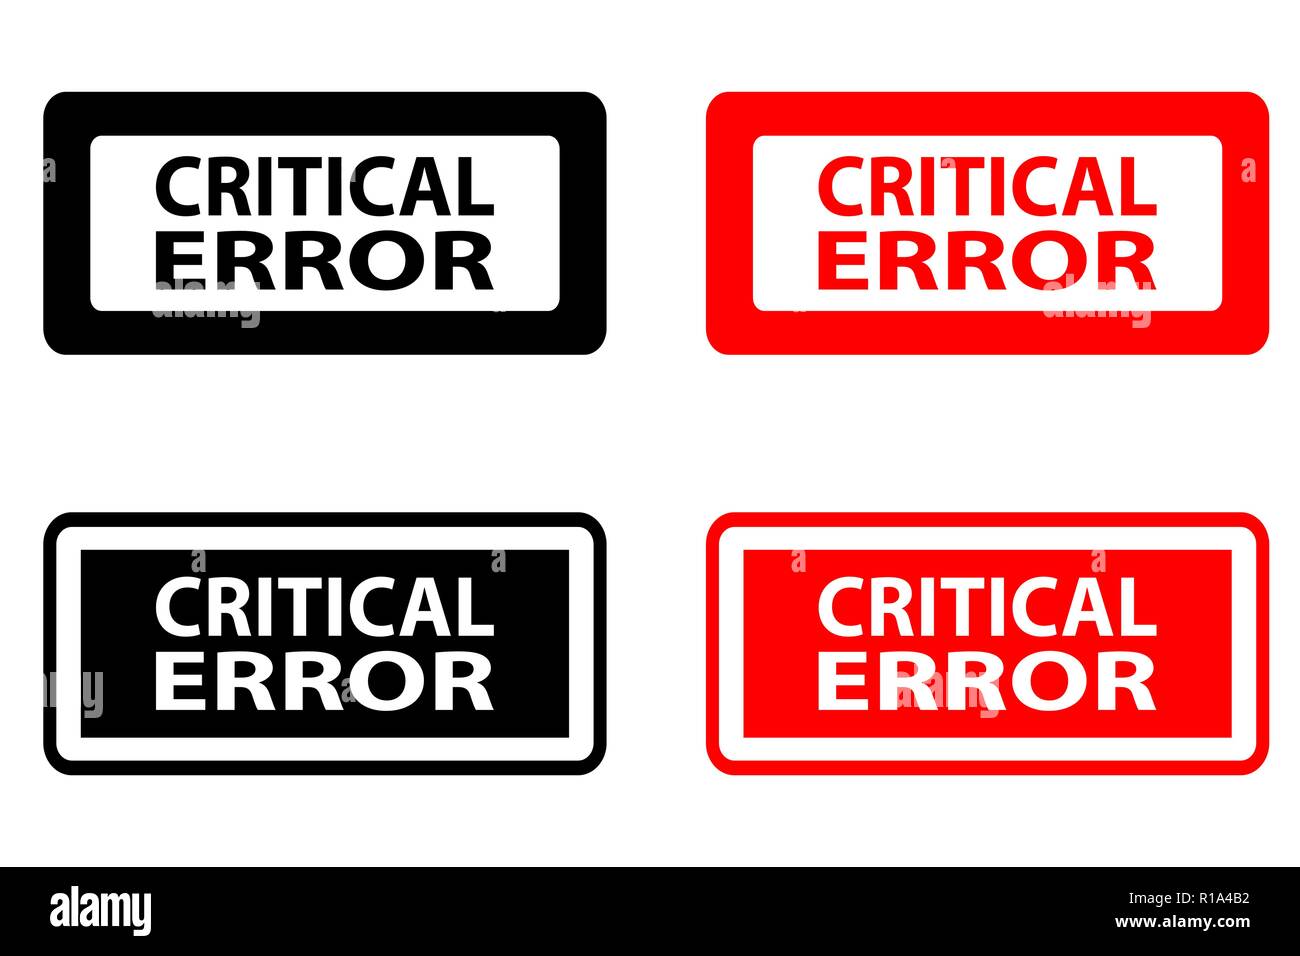 Critical error  - rubber stamp - vector - black and red Stock Vector